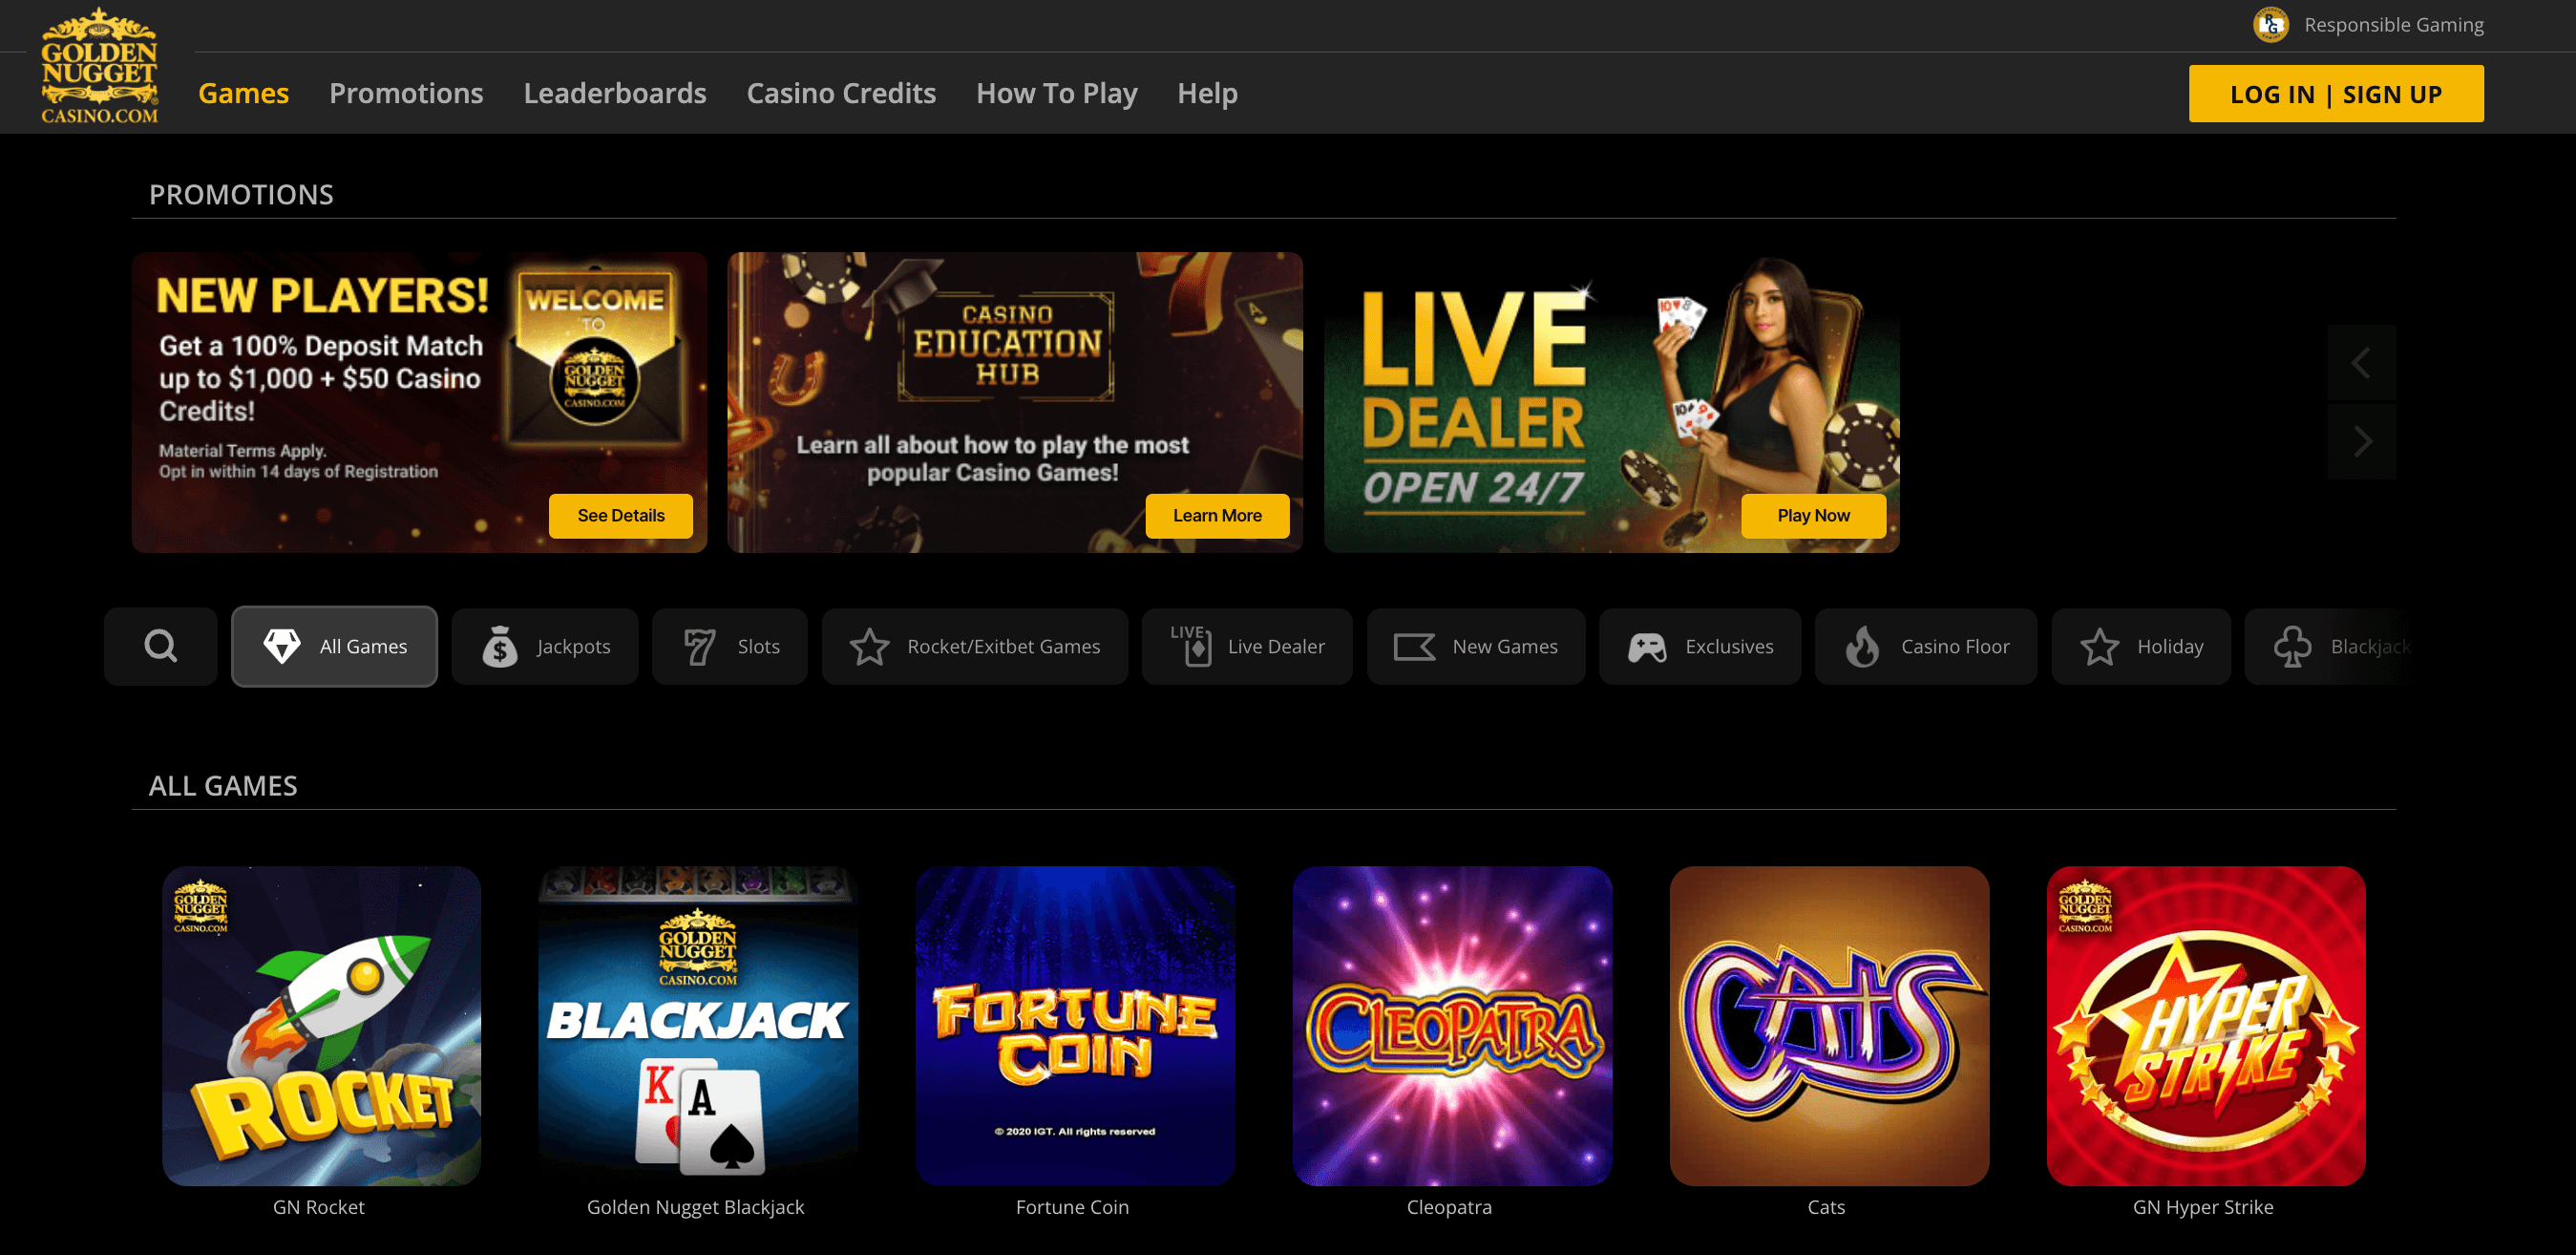 Golden Nugget Online Casino PA Home Page